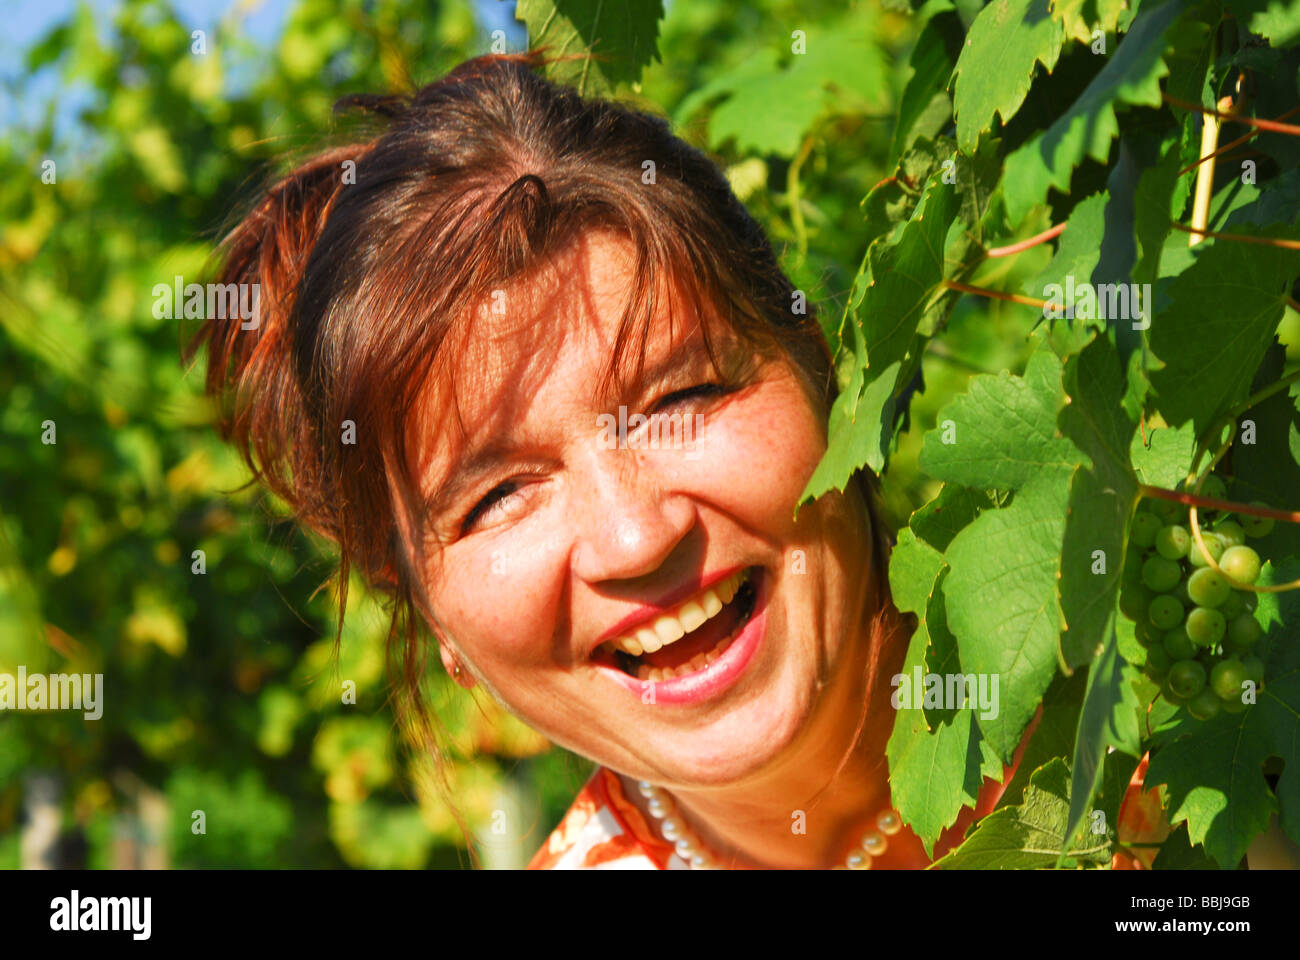 Woman smiling in a wineyard Stock Photo